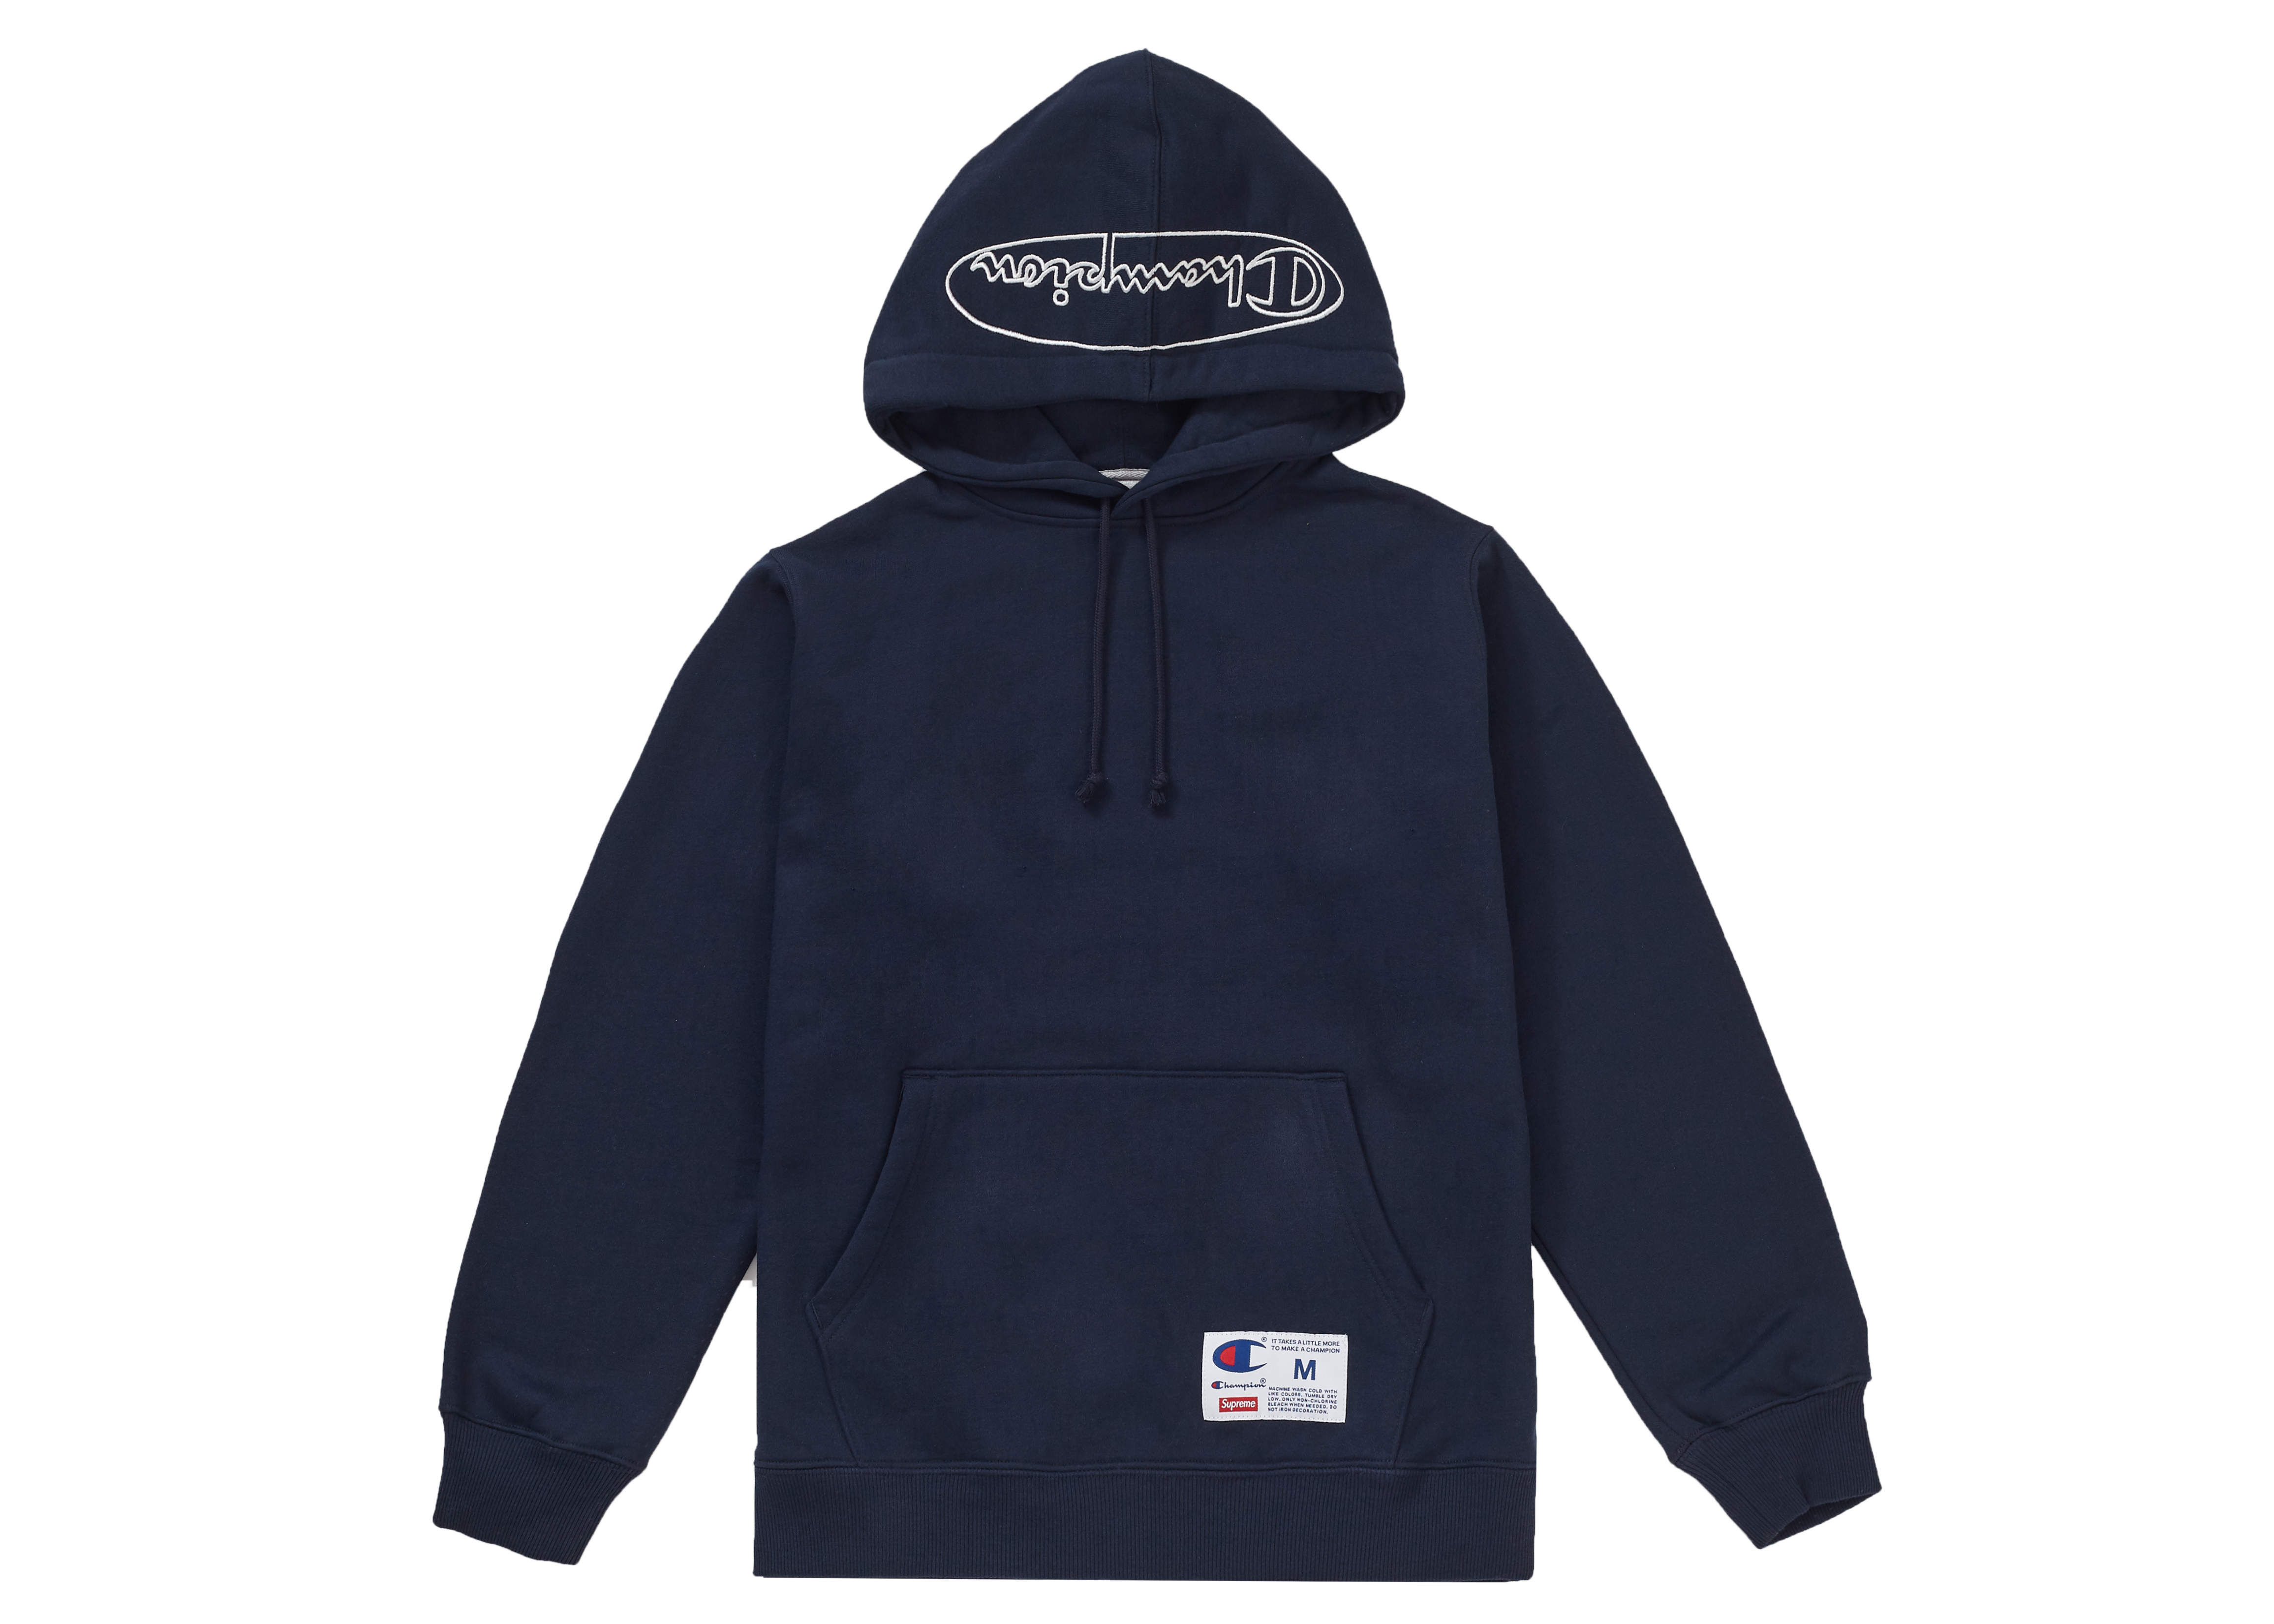 Supreme®/Champion® Outline Hooded navy